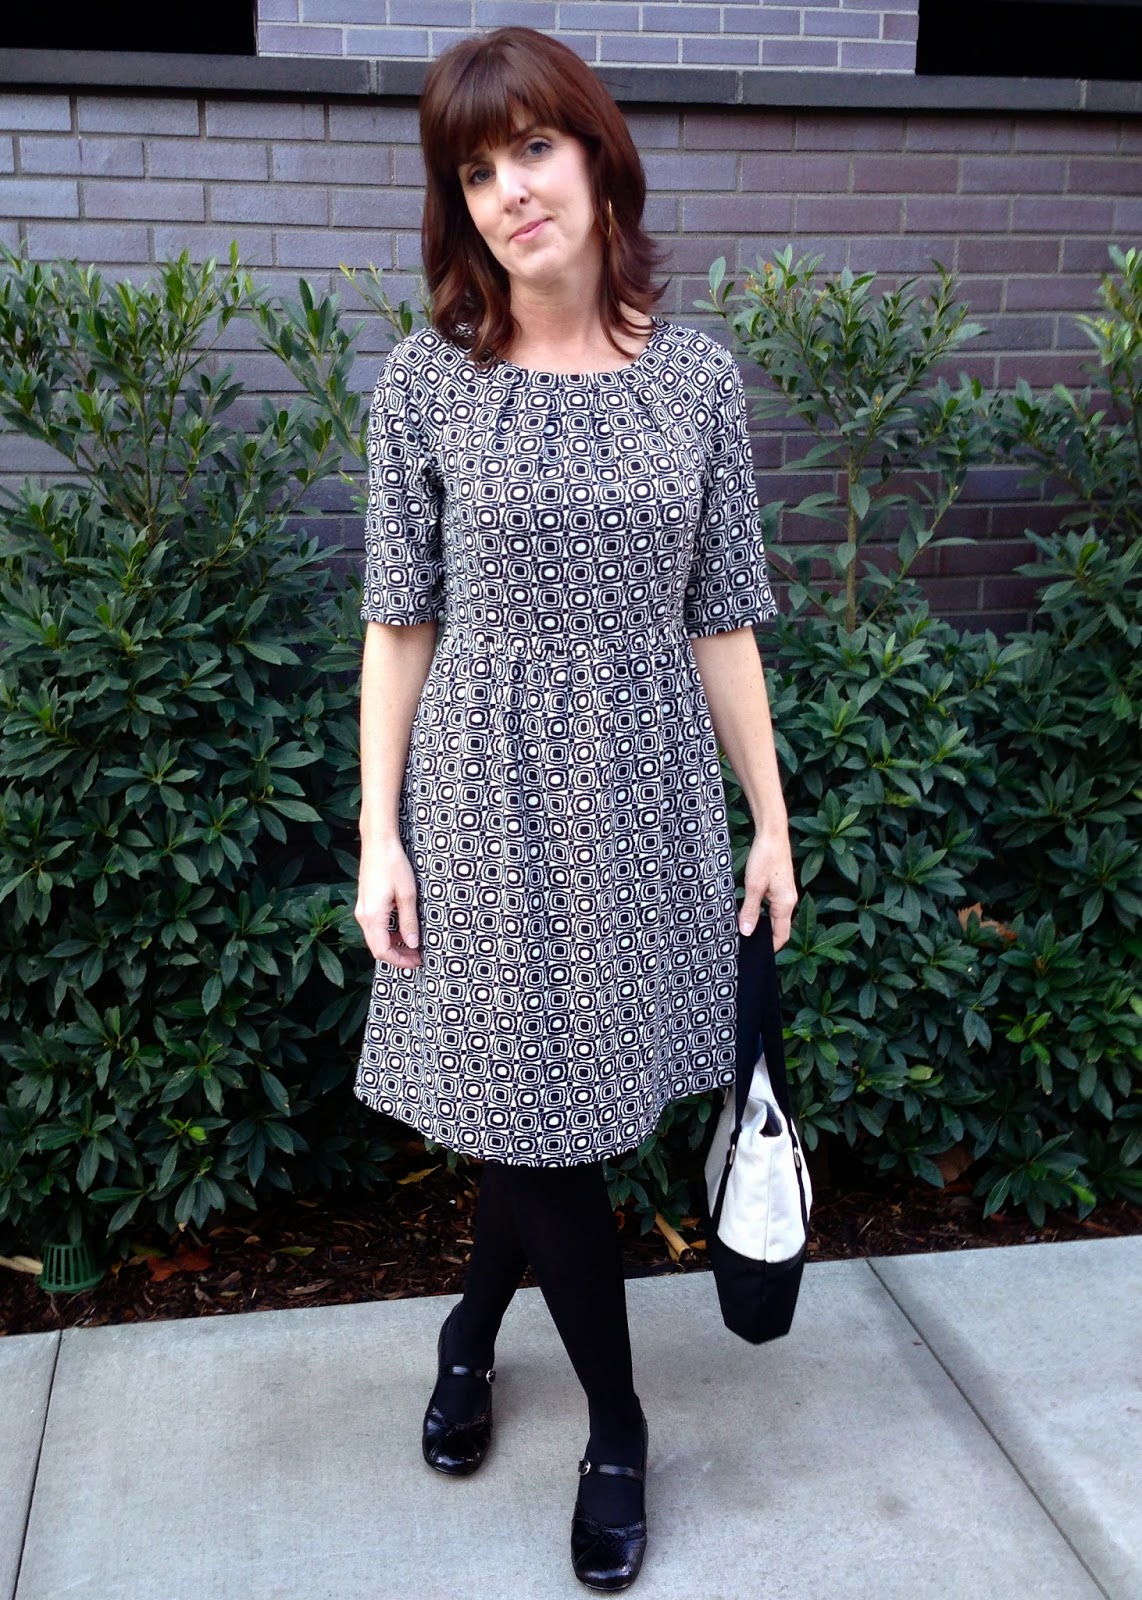 Made by a Fabricista: Franken-pattern Skater Dress by Diane